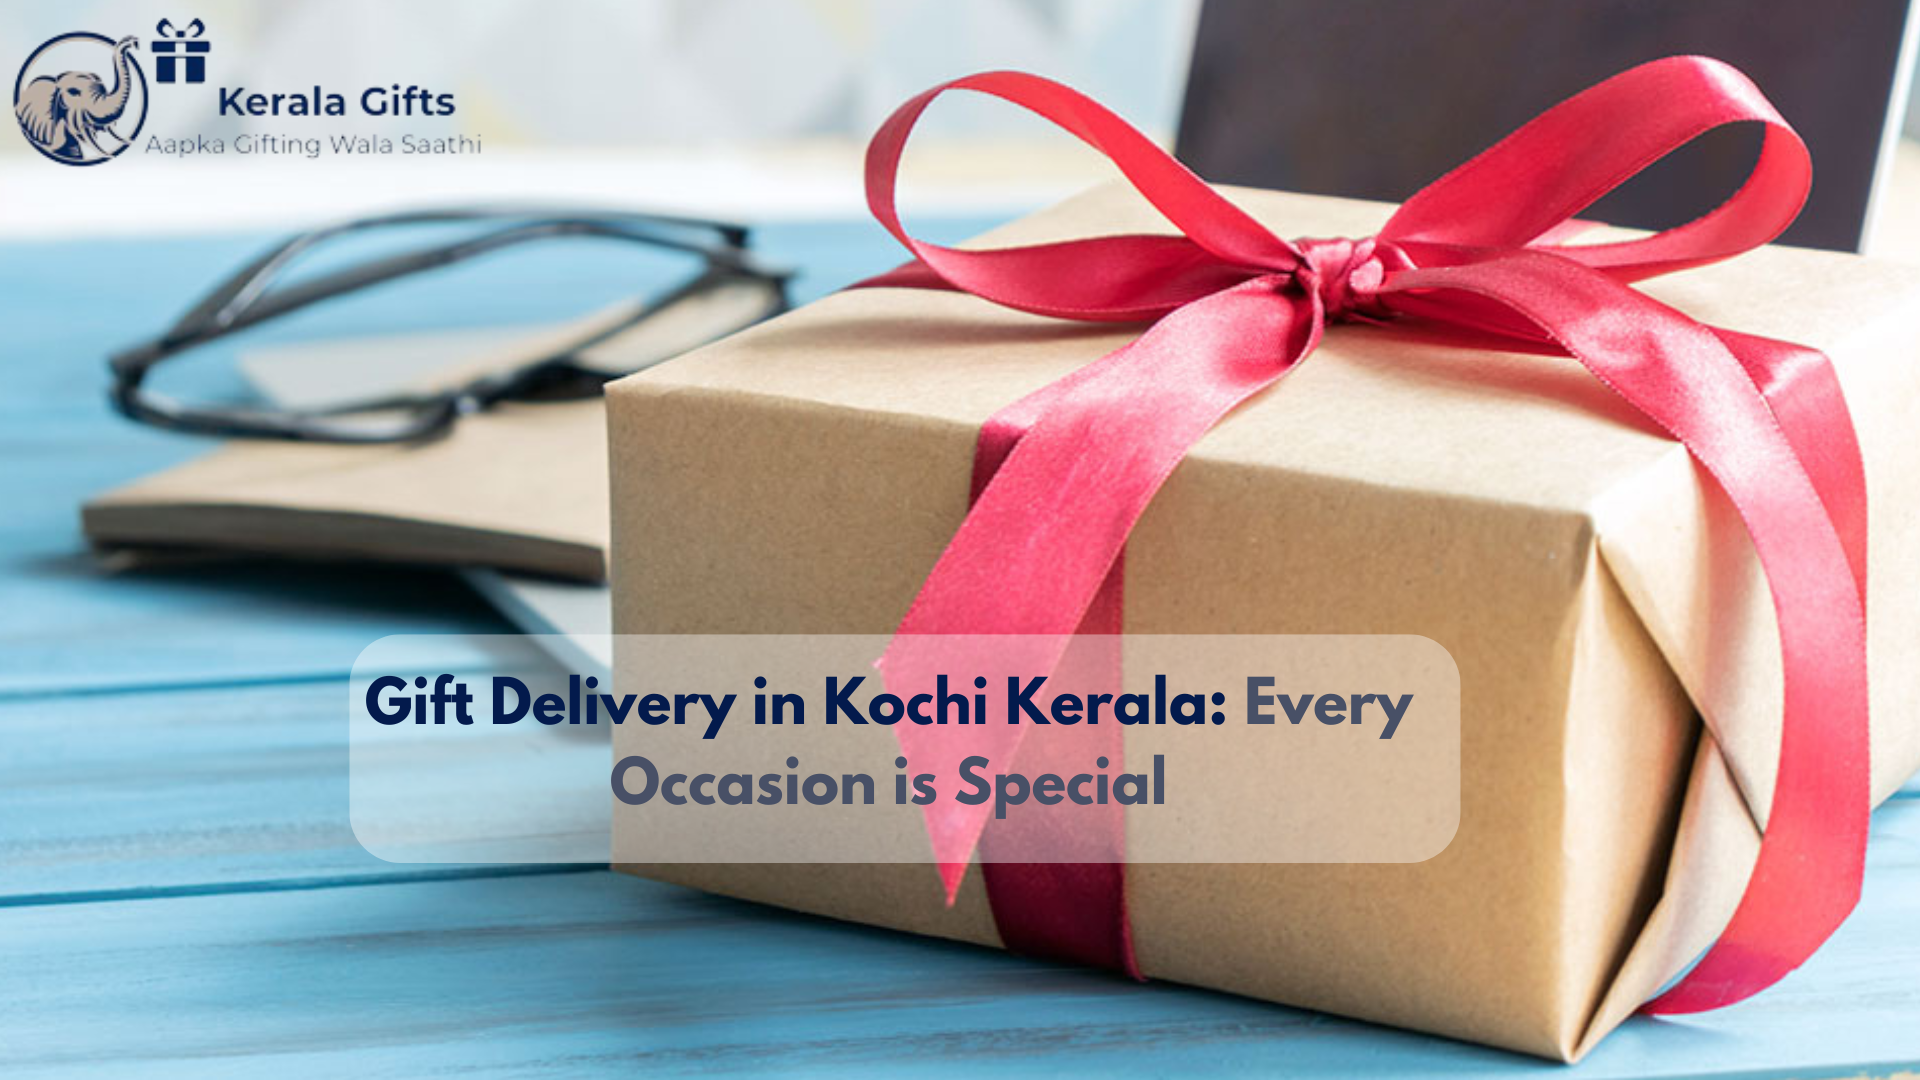 Gift Delivery in Kochi Kerala: Every Occasion is Special